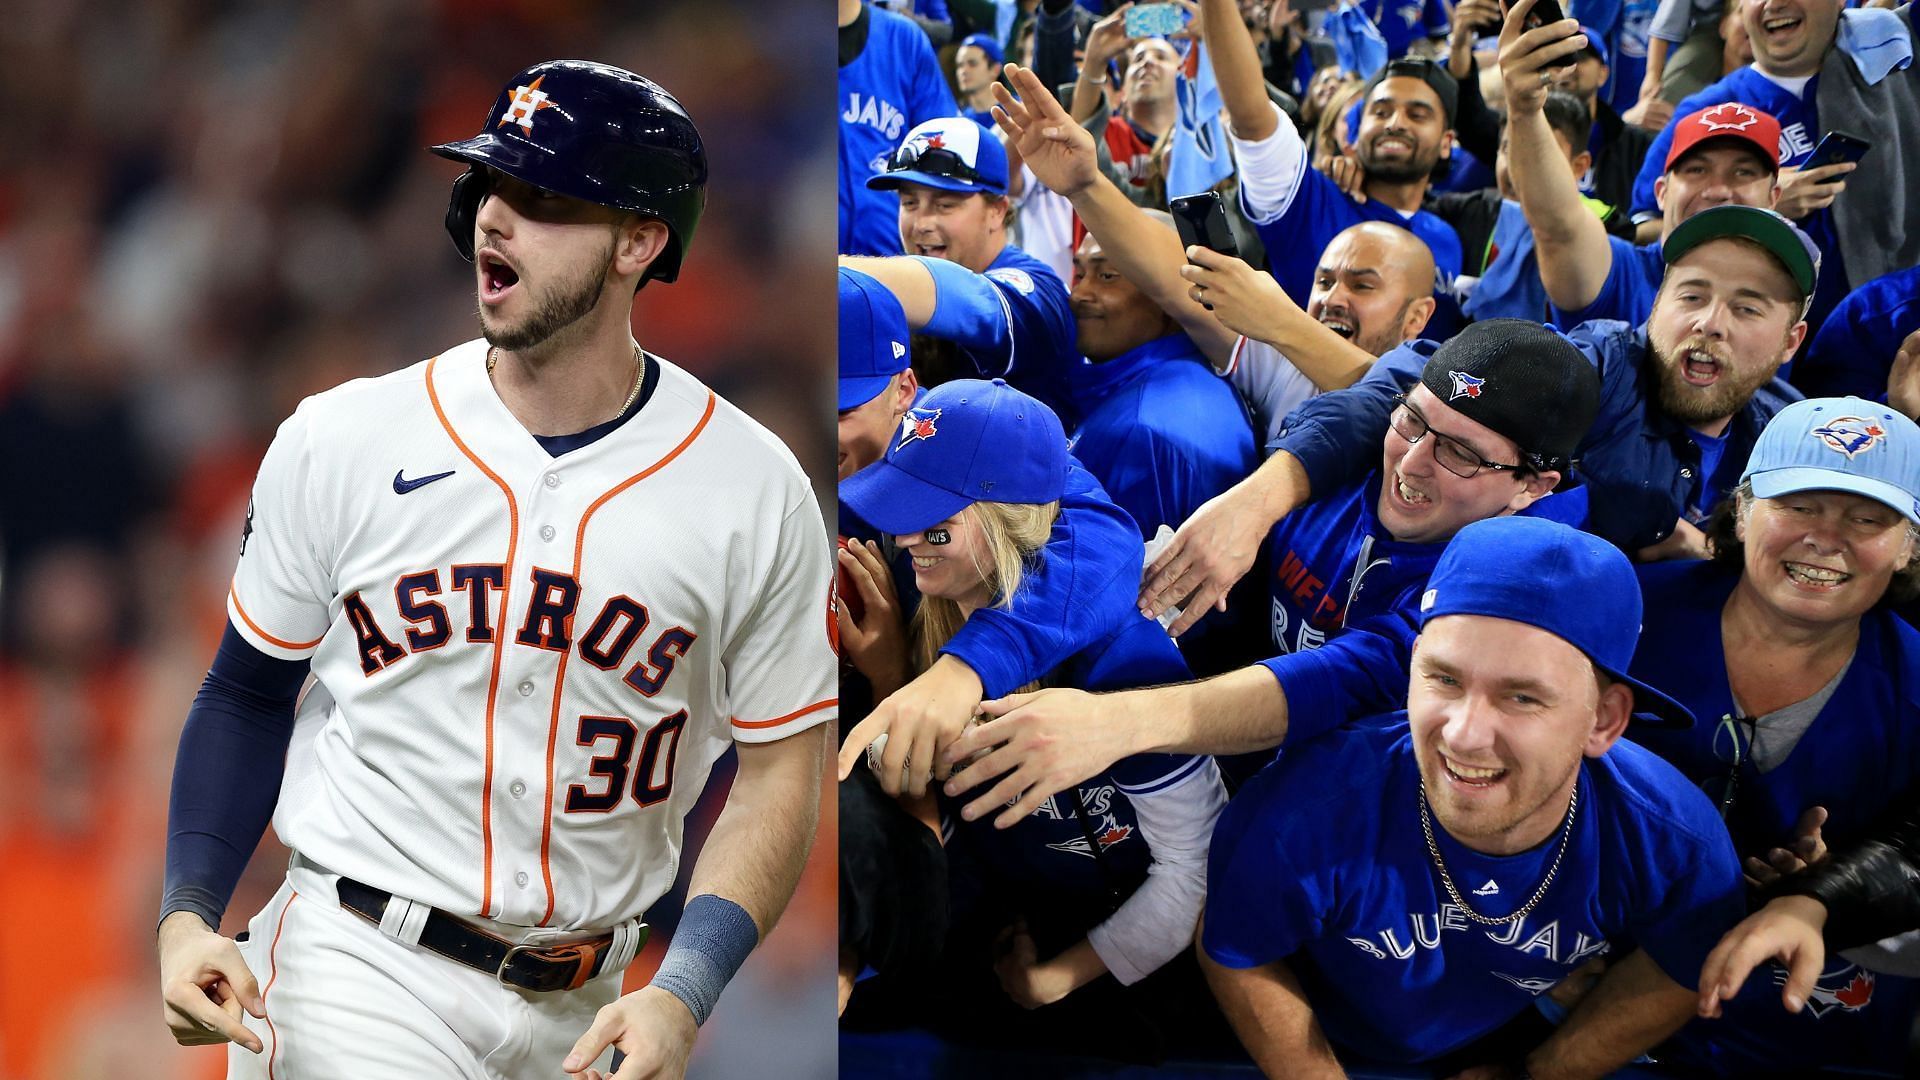 Blue Jays fans got their facts slightly wrong in attempt to heckle Kyle Tucker of the Houston Astros